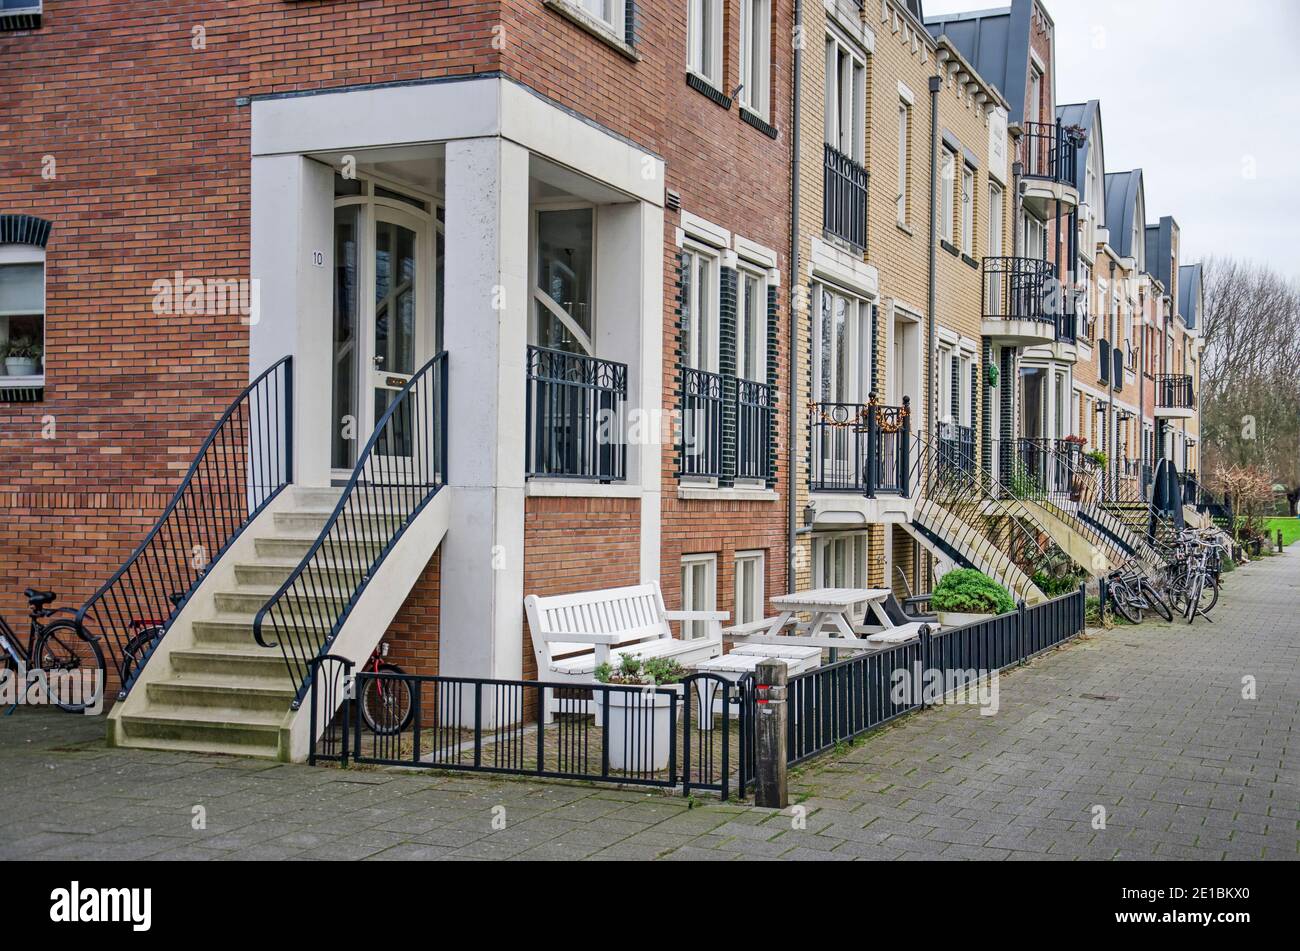 Voorschoten, The Netherlands, January 3, 2021: row of townhouses in Krimwijk neighbourhood with brick facades in a post-modern style with jugenstil in Stock Photo